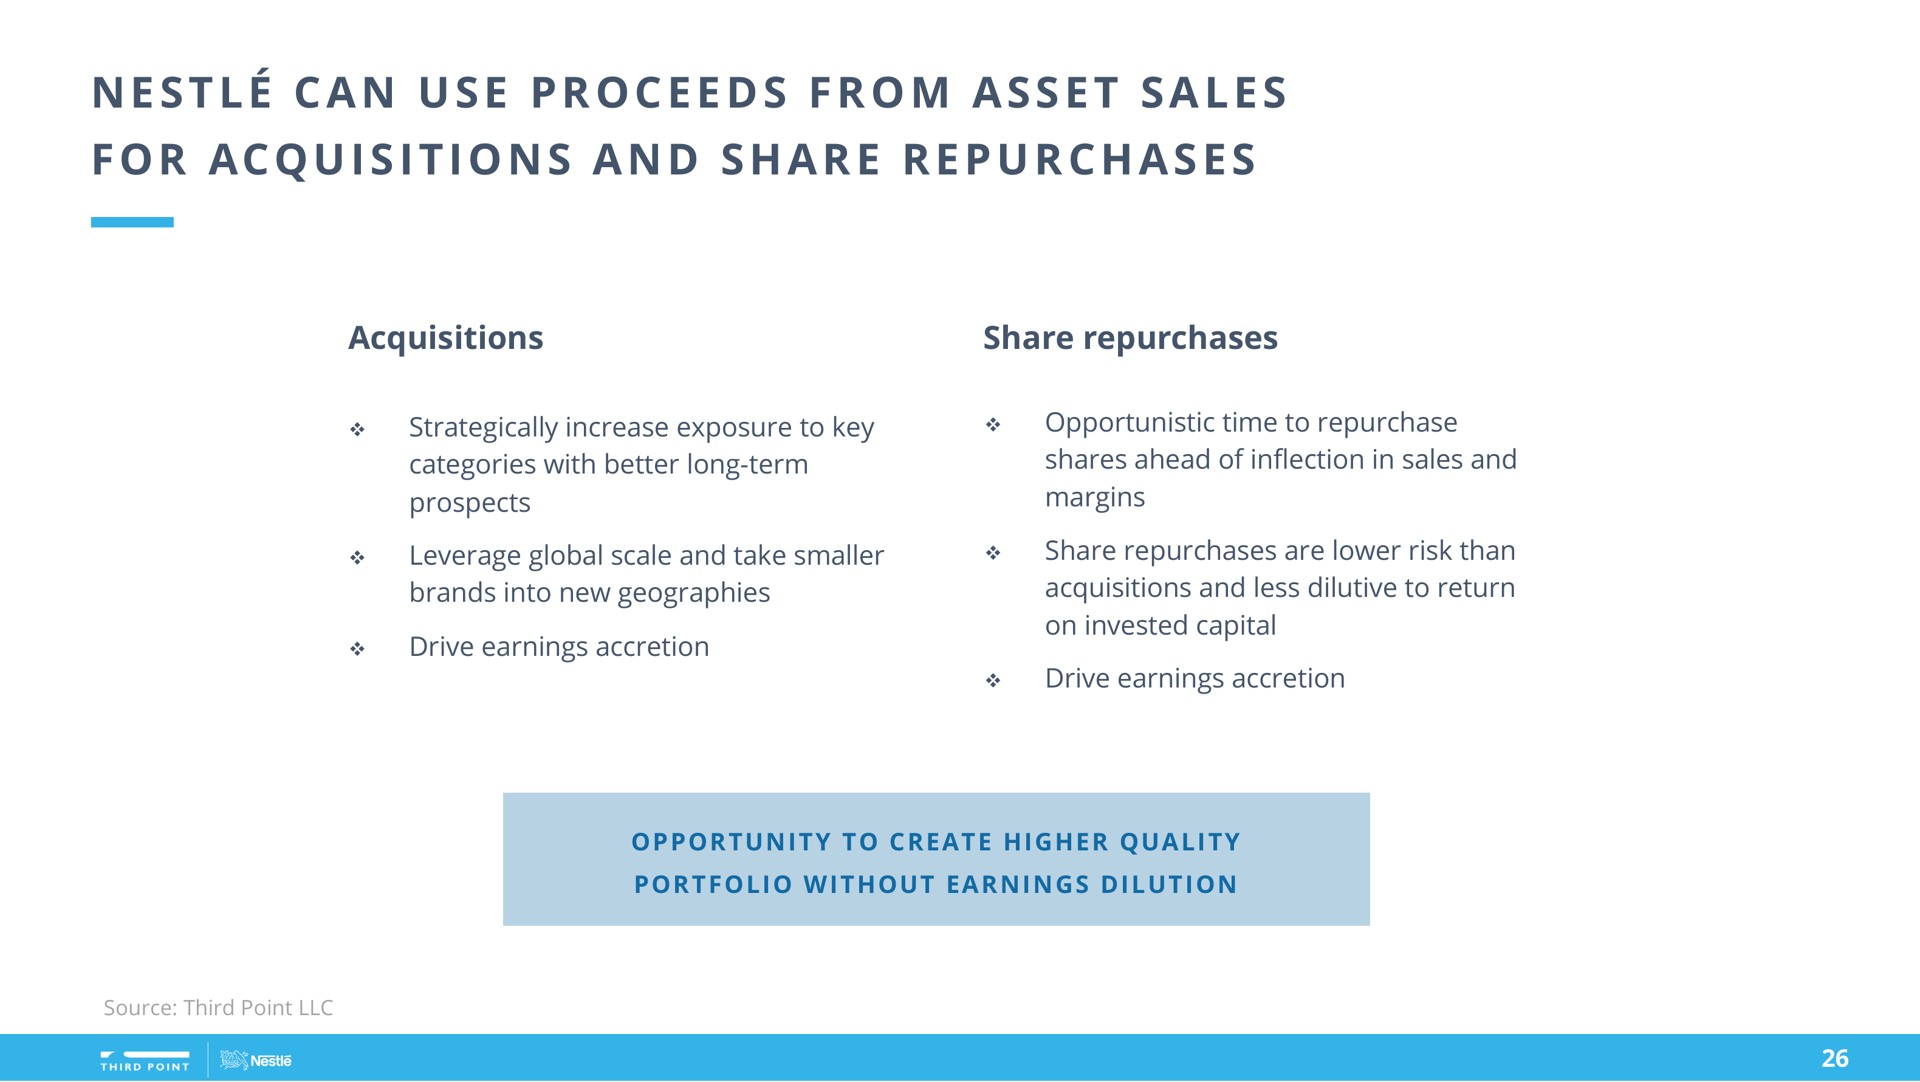 a a a i i i a a a nestle can use proceeds from asset sales for acquisitions and share repurchases | Third Point Management